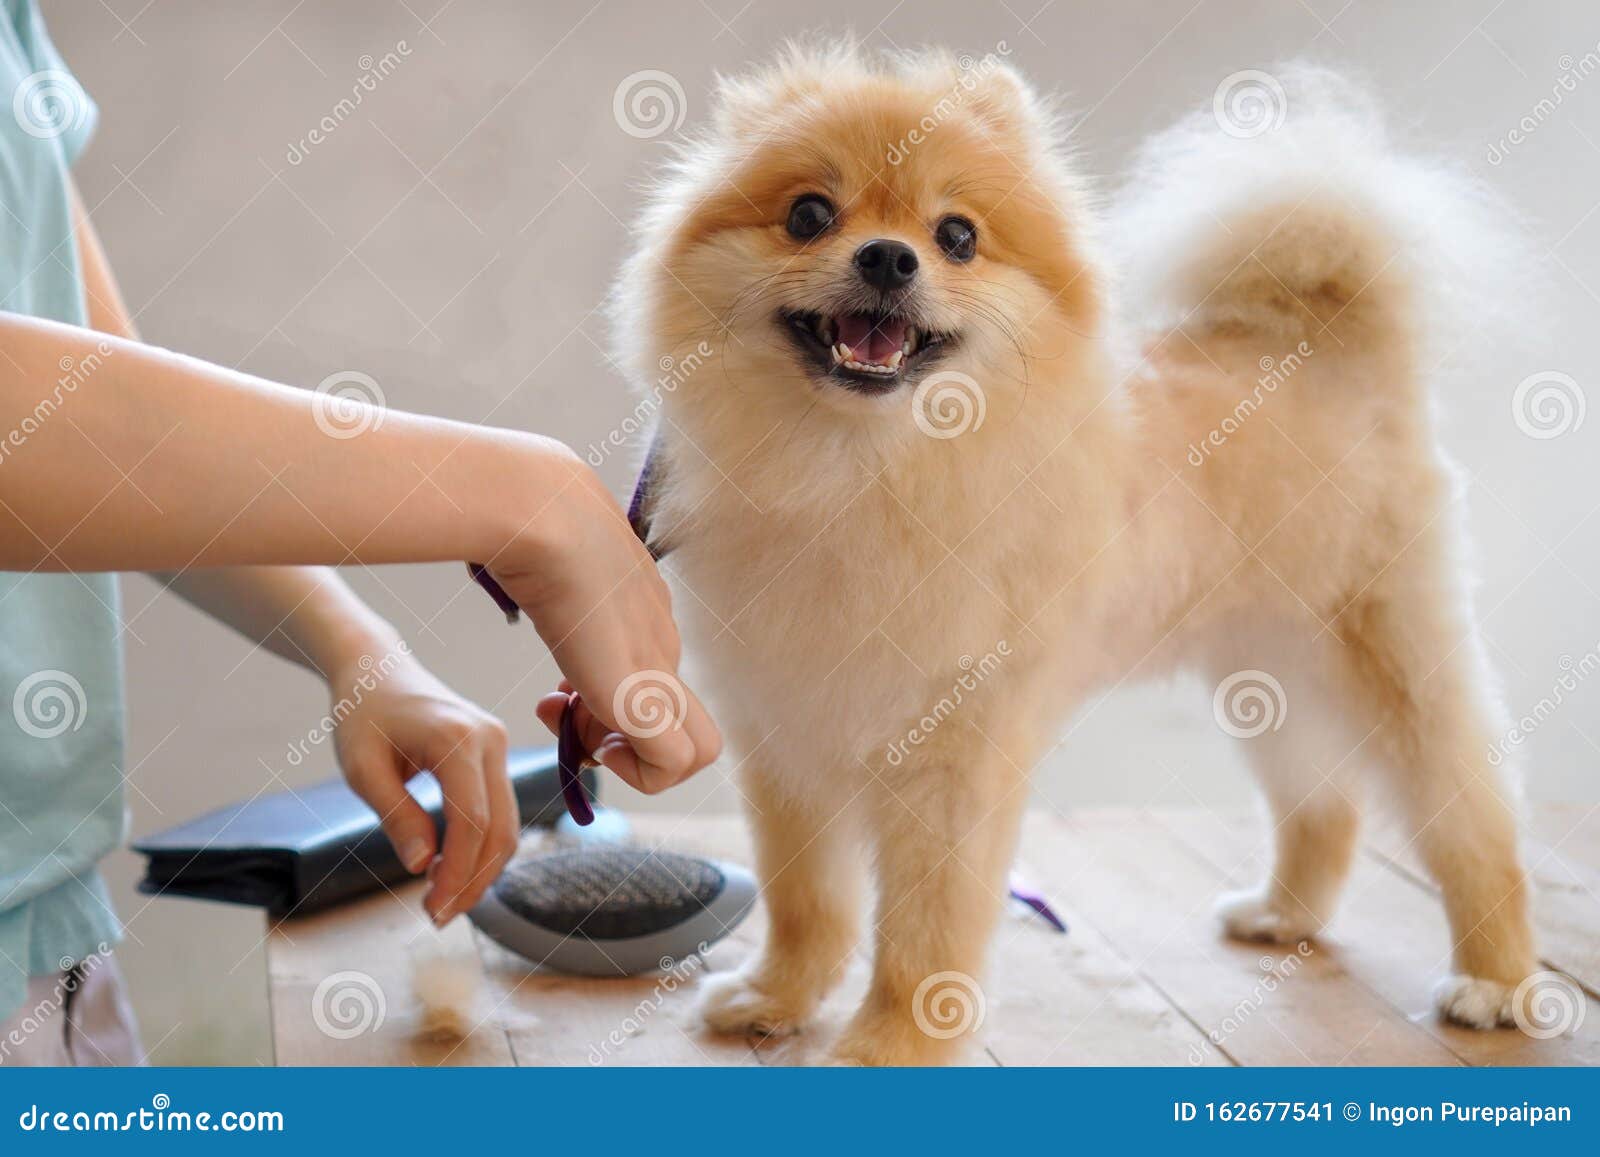 Groomer Haircut Pomeranian Dog on the Table of Outdoor. Process of Final  Shearing of a Dog`s Hair with Scissors Stock Image - Image of care, beauty:  162677541